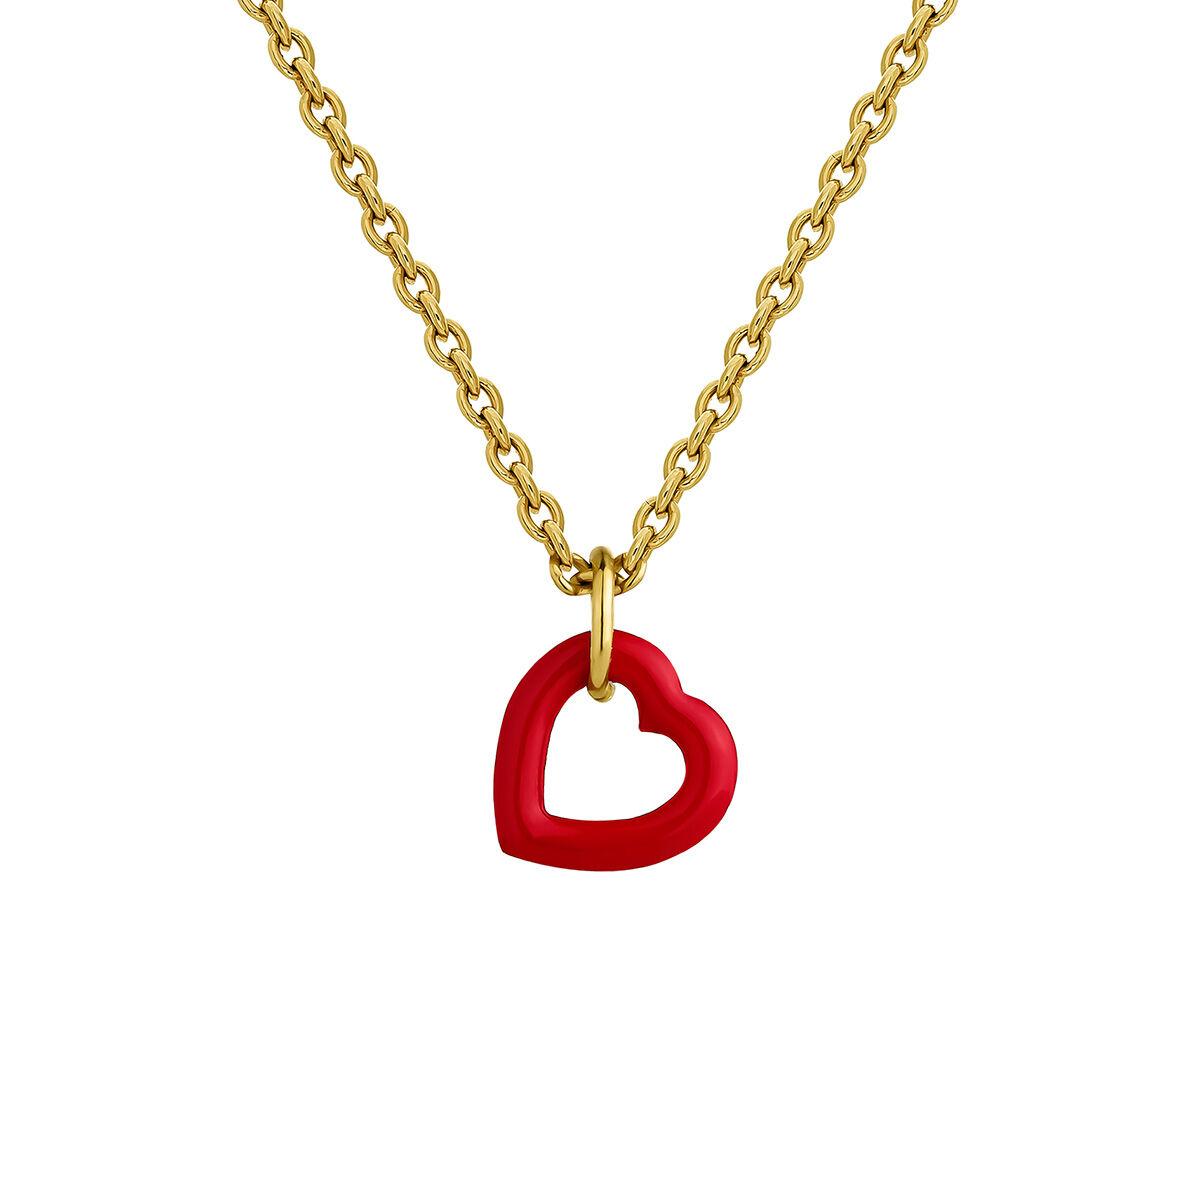 Heart pendant in 18k yellow gold-plated silver with red enamel, J05162-02-ROJENA, hi-res